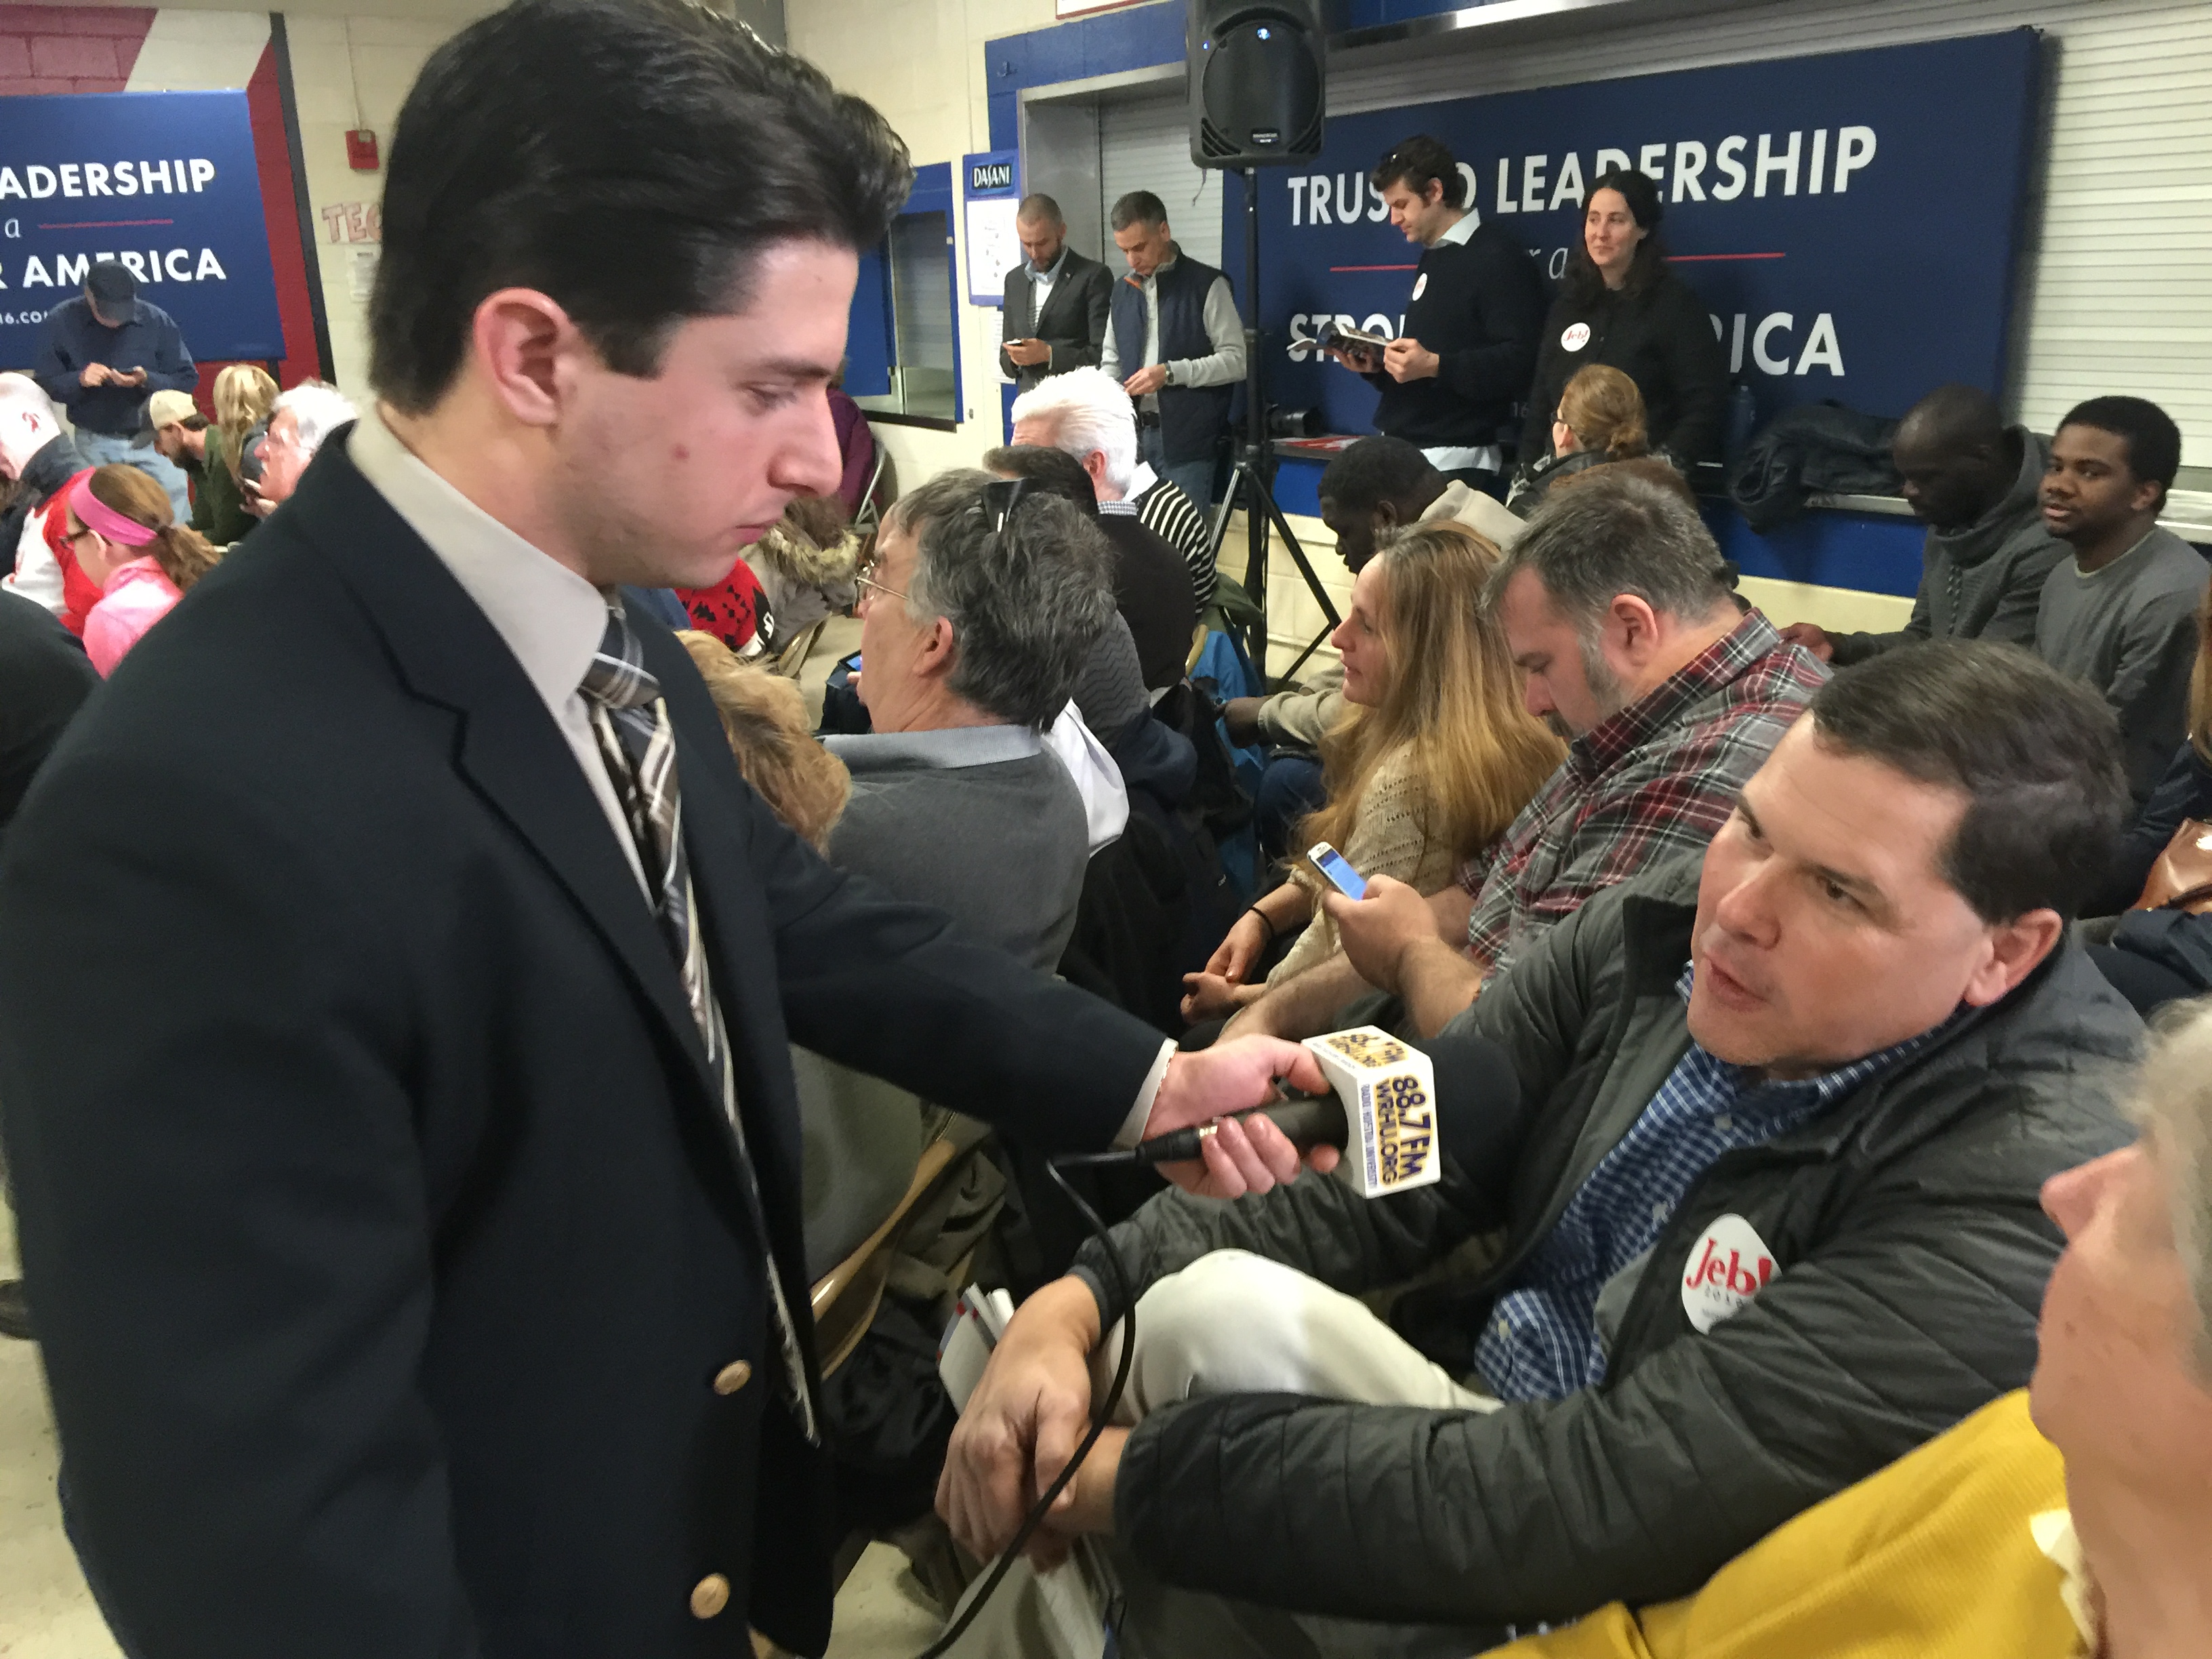 Neil A. Carousso interviews a Jeb Bush supporter at a Bush rally in New Hampshire.